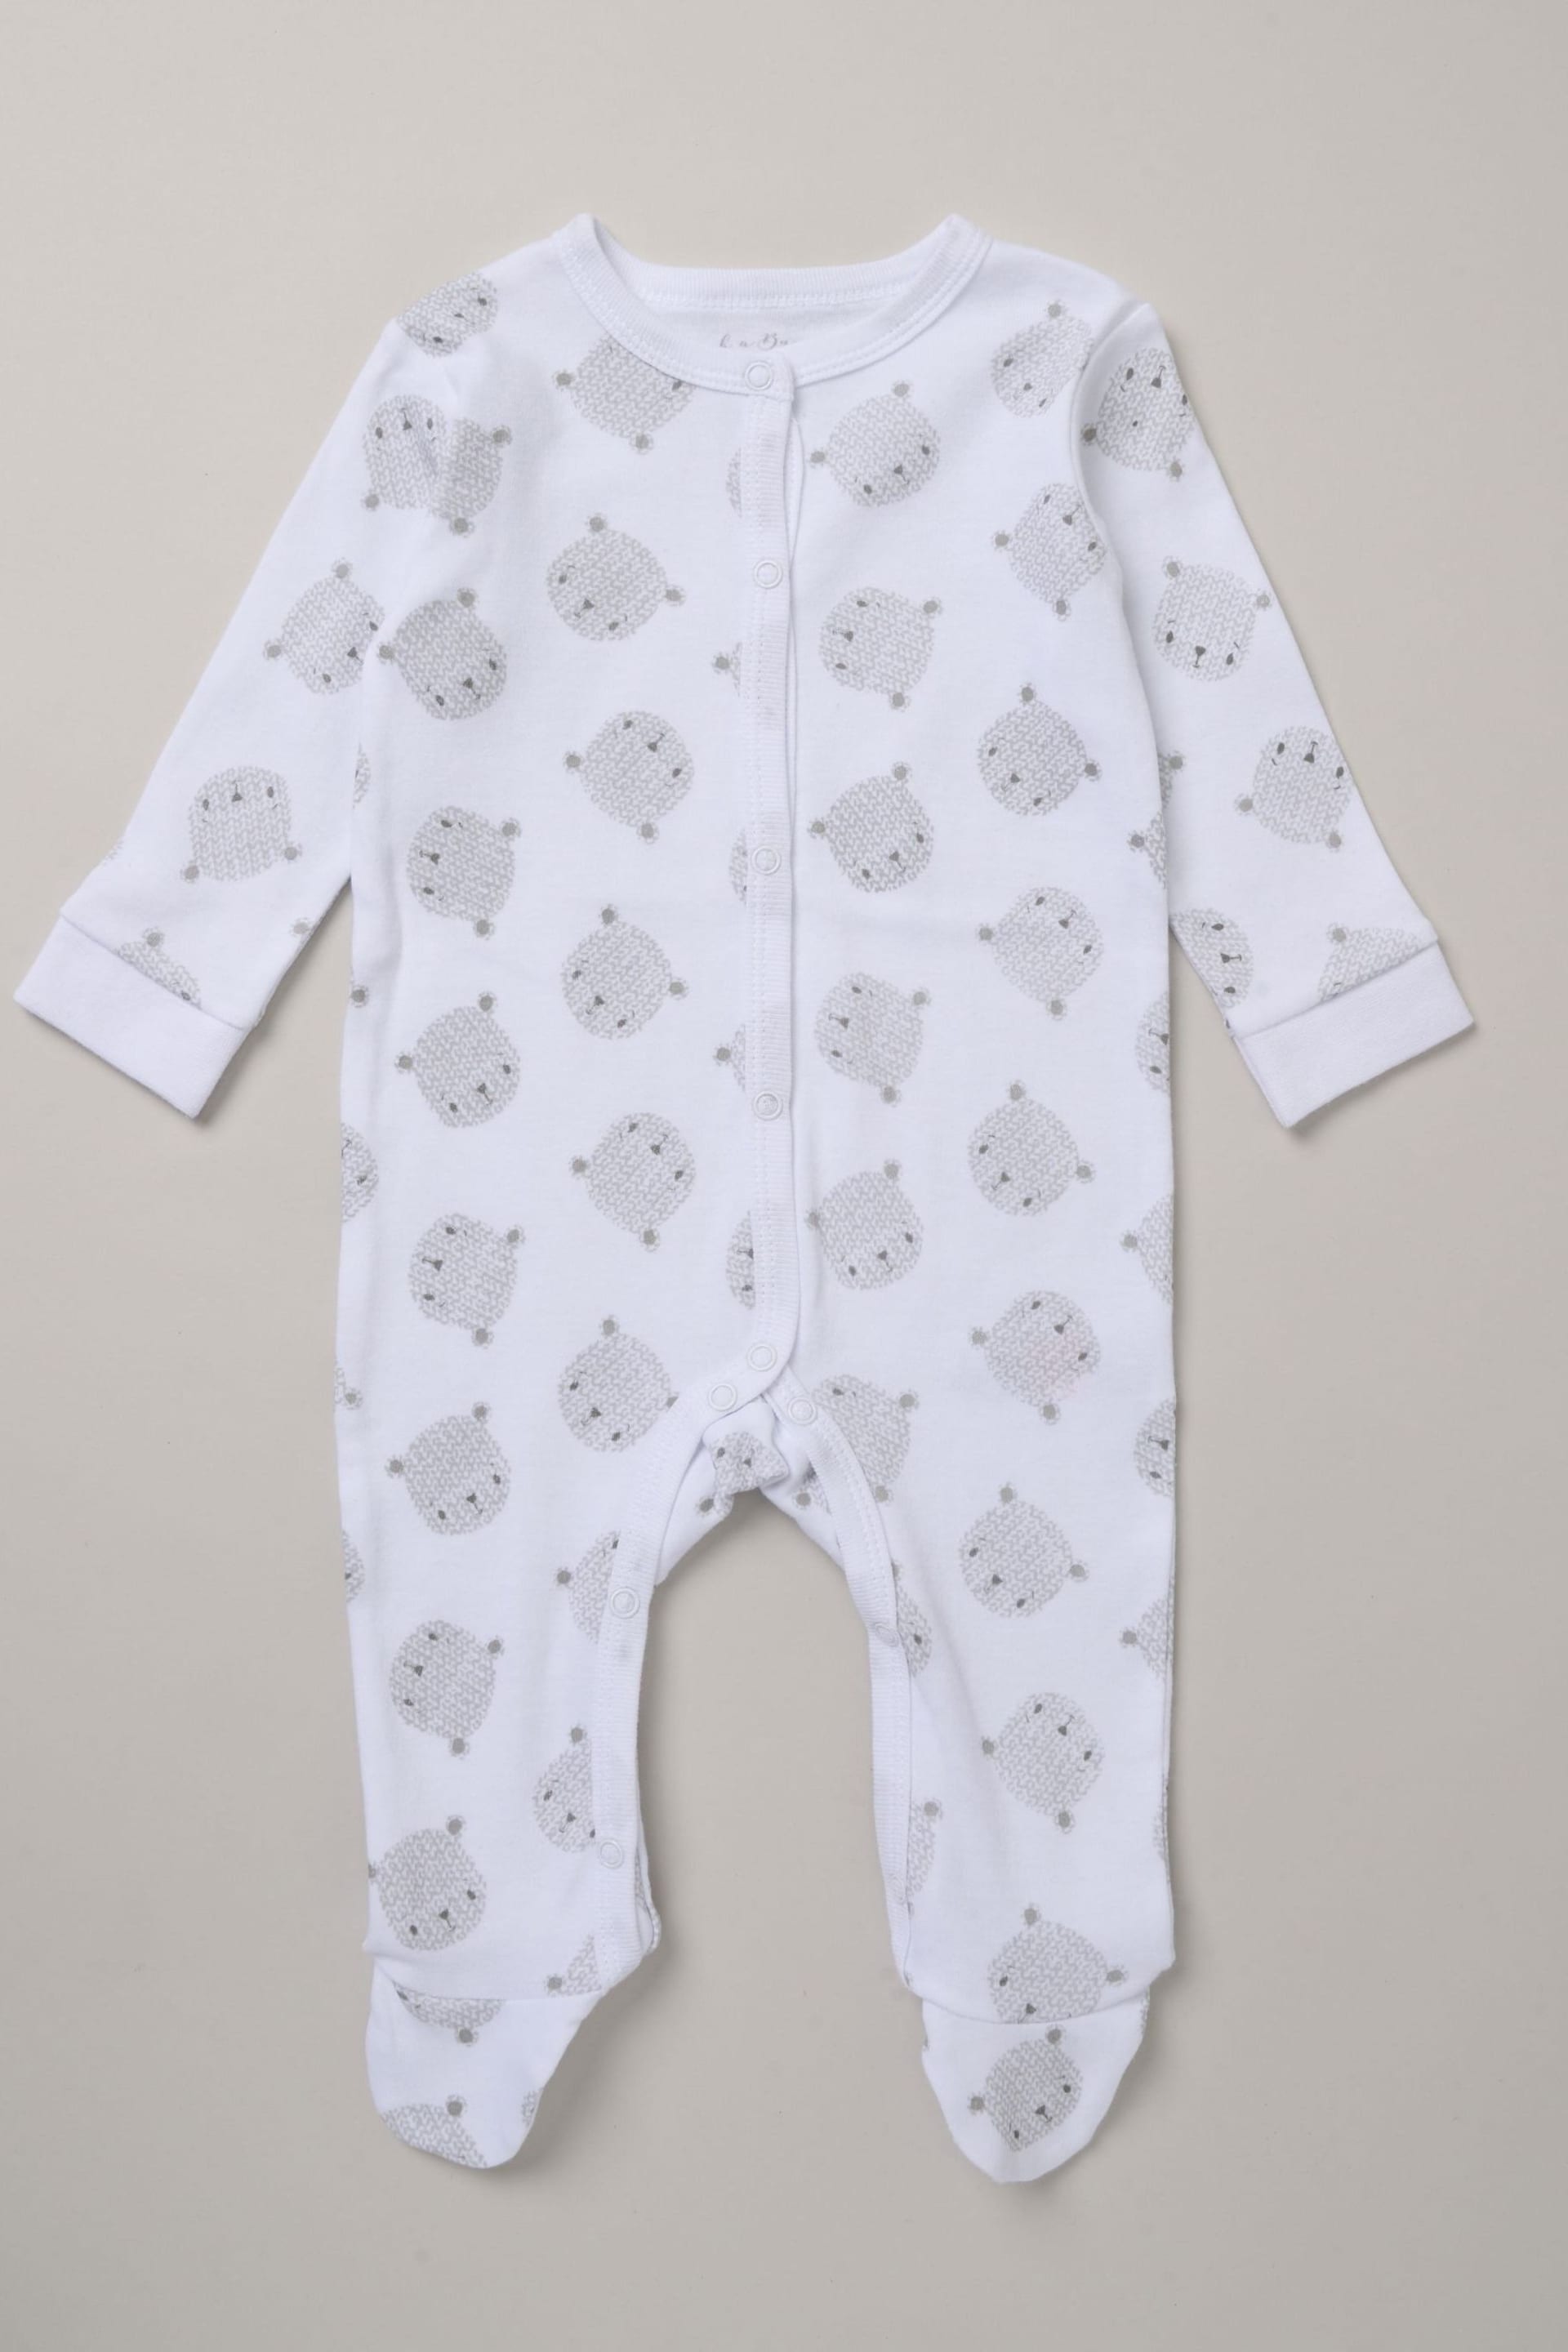 Rock-A-Bye Baby Boutique Bear Print Cotton 5-Piece Baby White Gift Set - Image 4 of 6